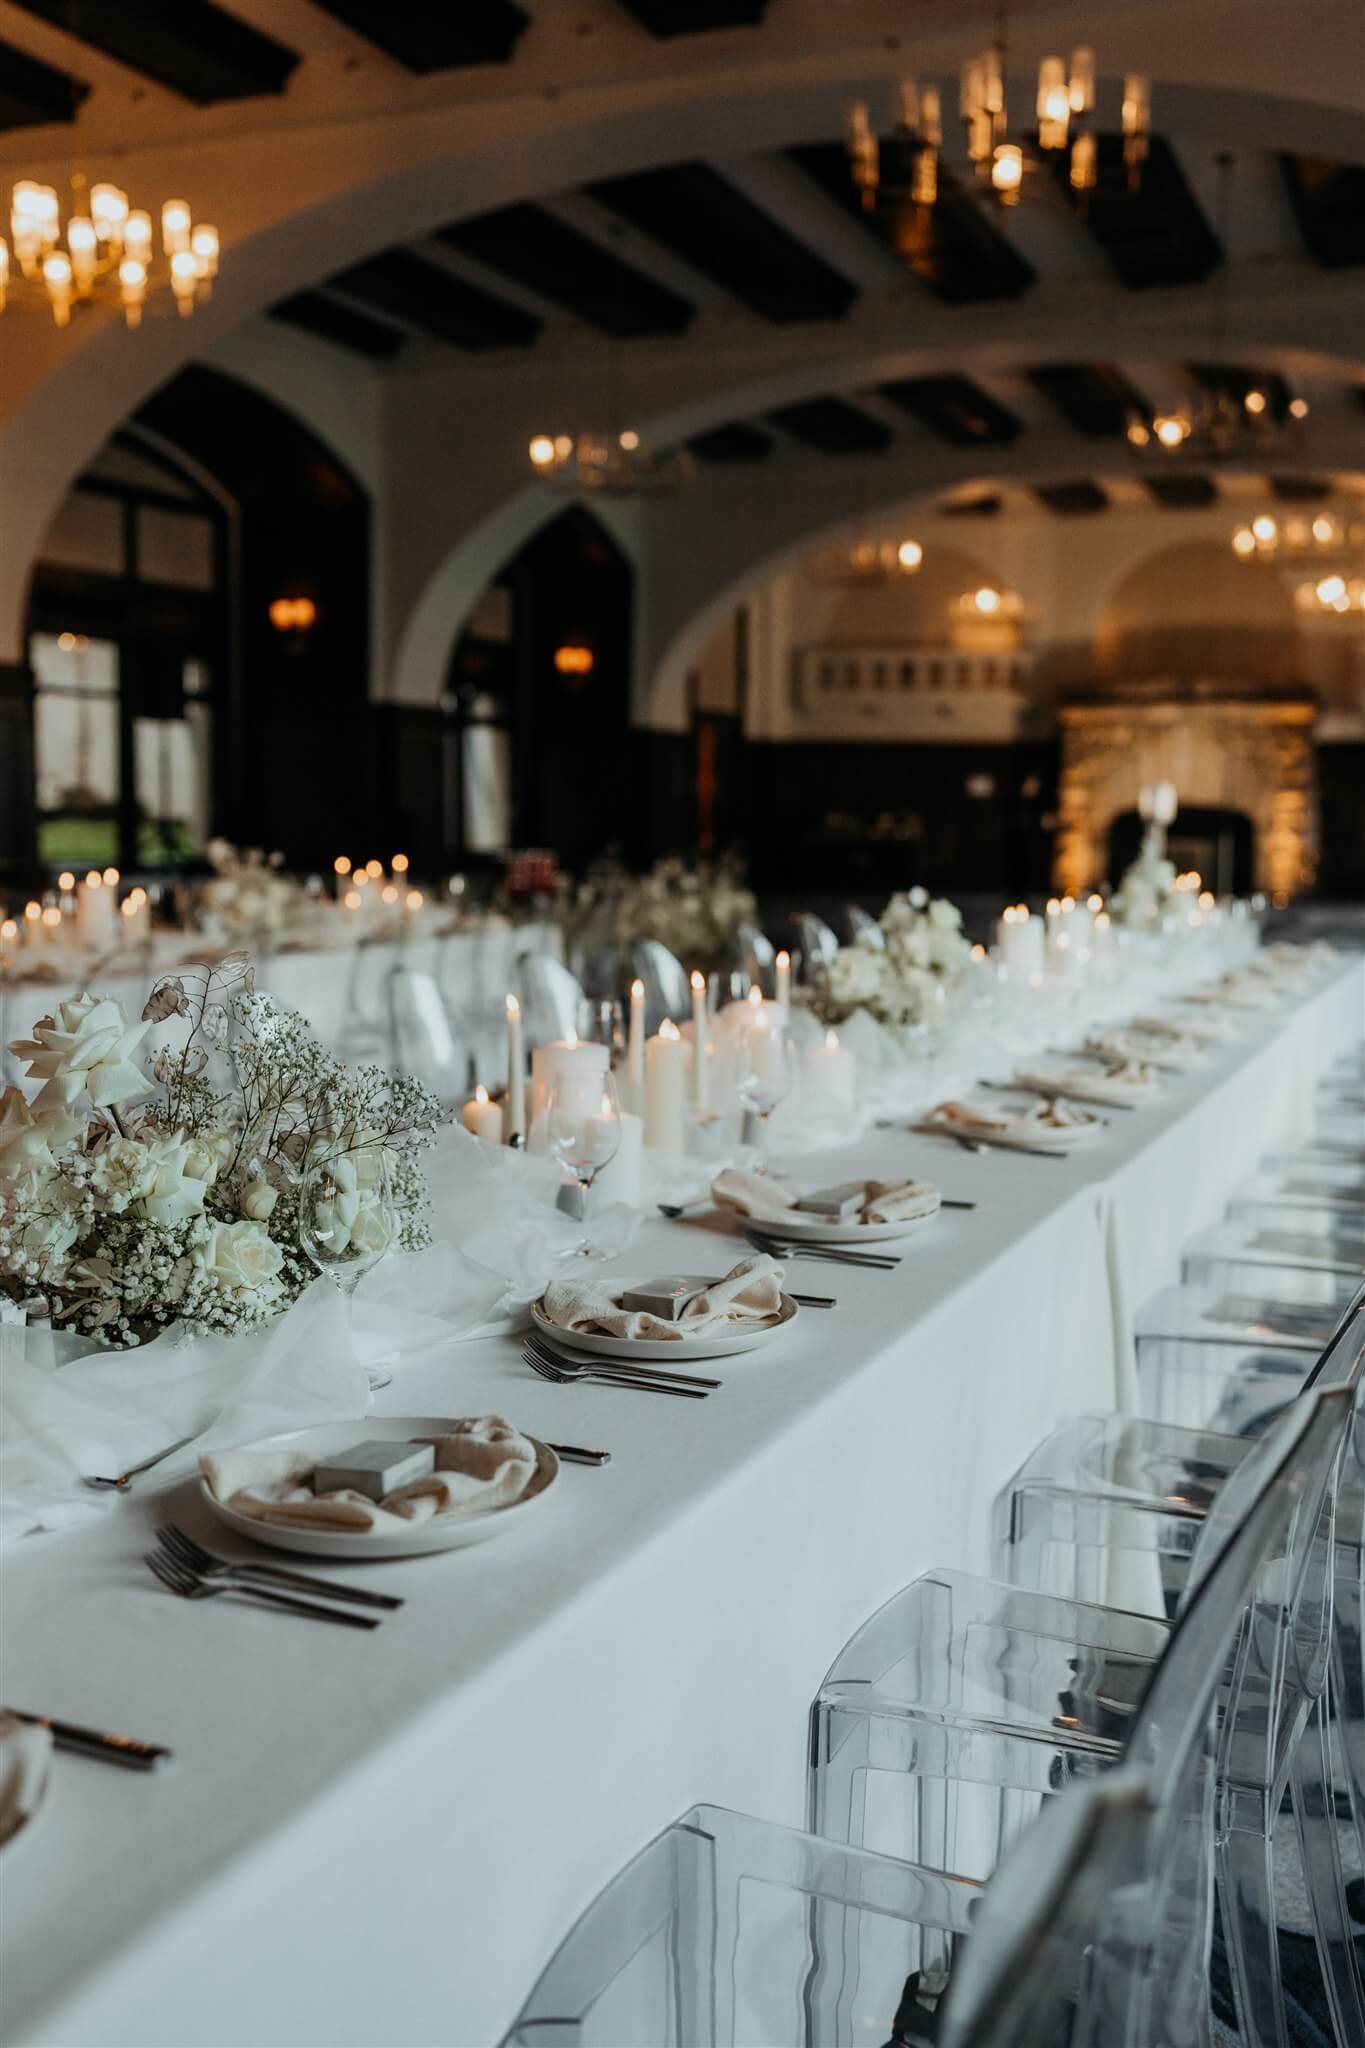 Reception table with white and gold wedding decorations